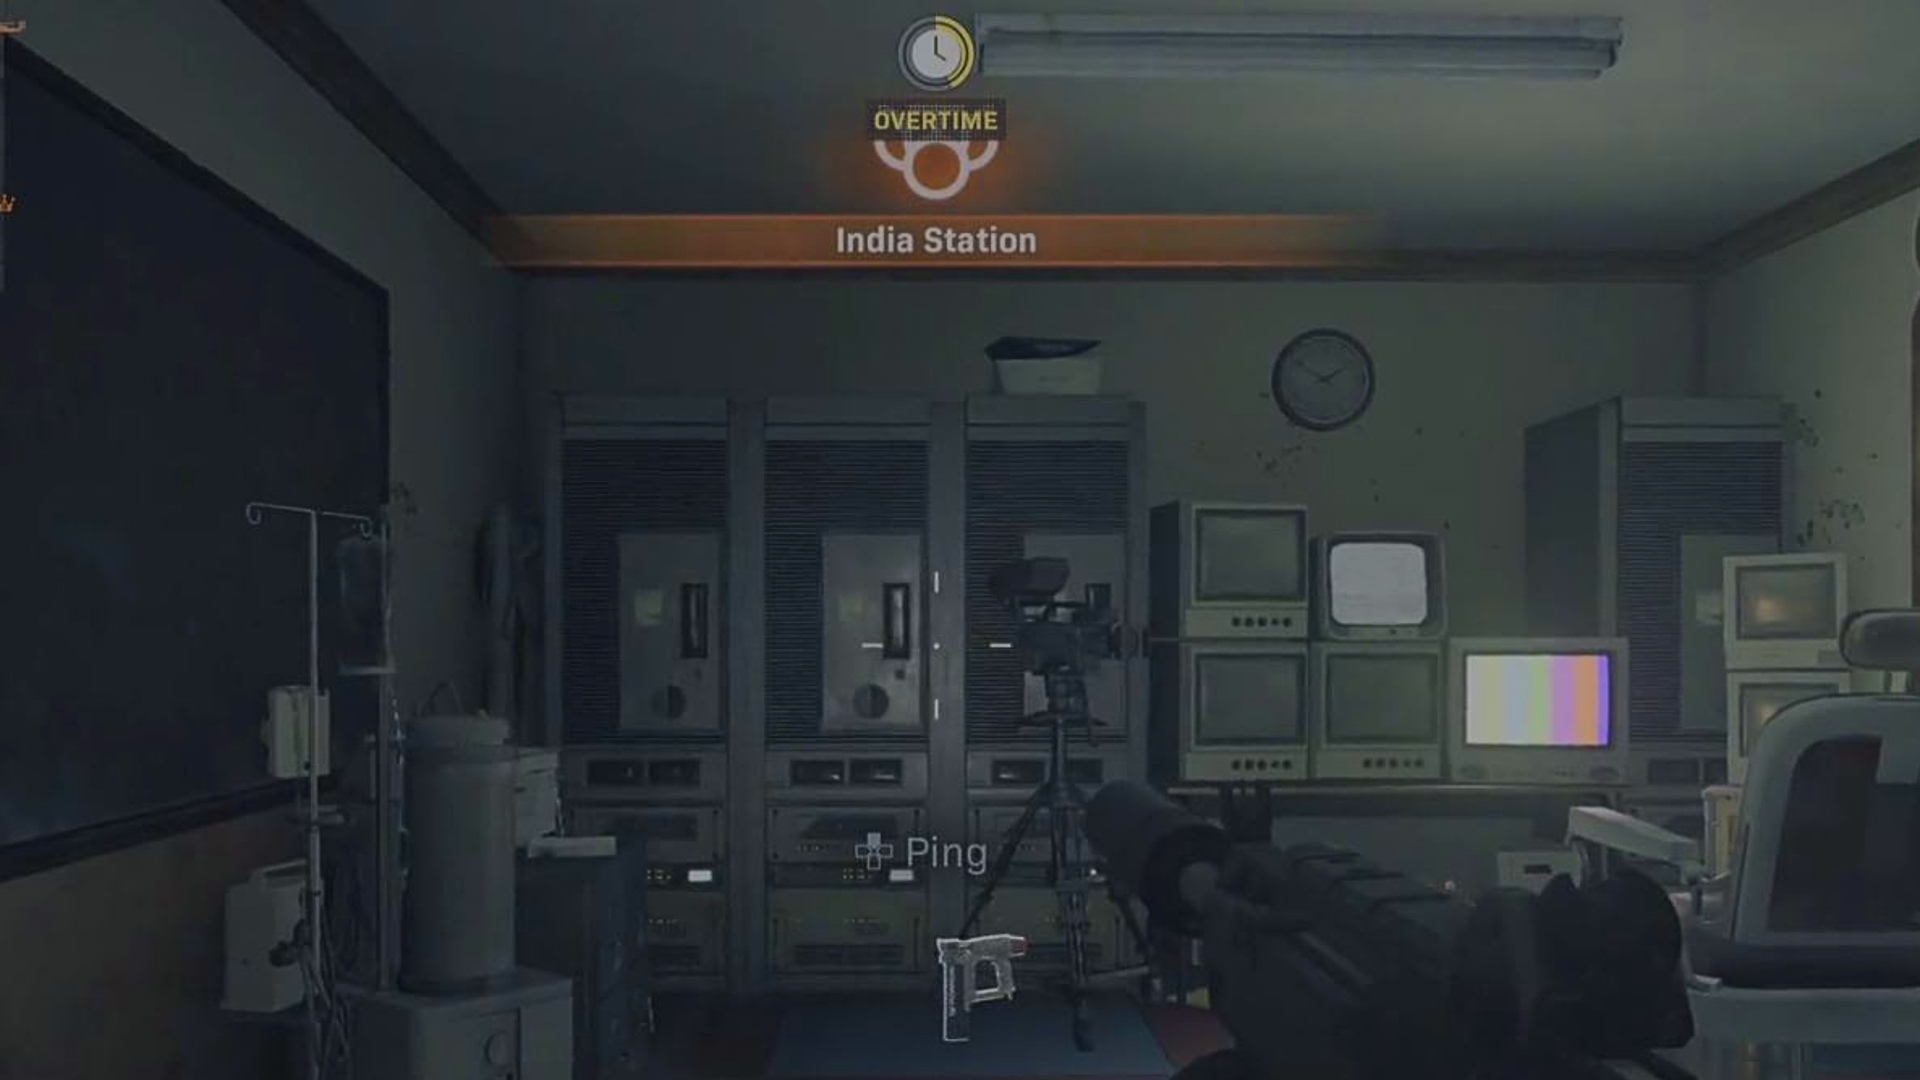 Warzone Red Door locations: The interior of the India Station, with several monitors and tech around the room.